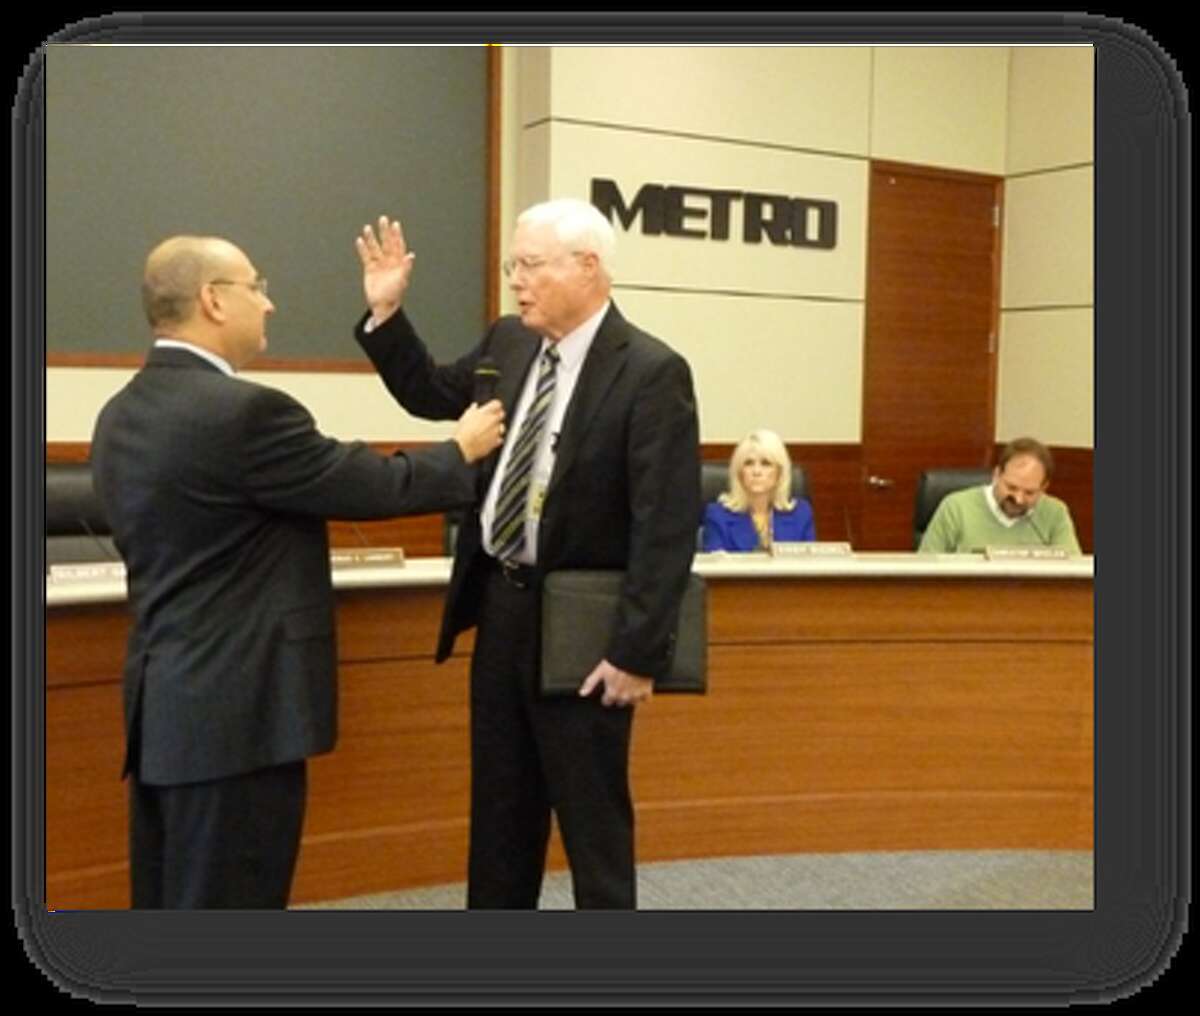 Jim Robinson was sworn in as a board member of Metropolitan Transit Authority of Harris County during its Oct. 28 meeting.